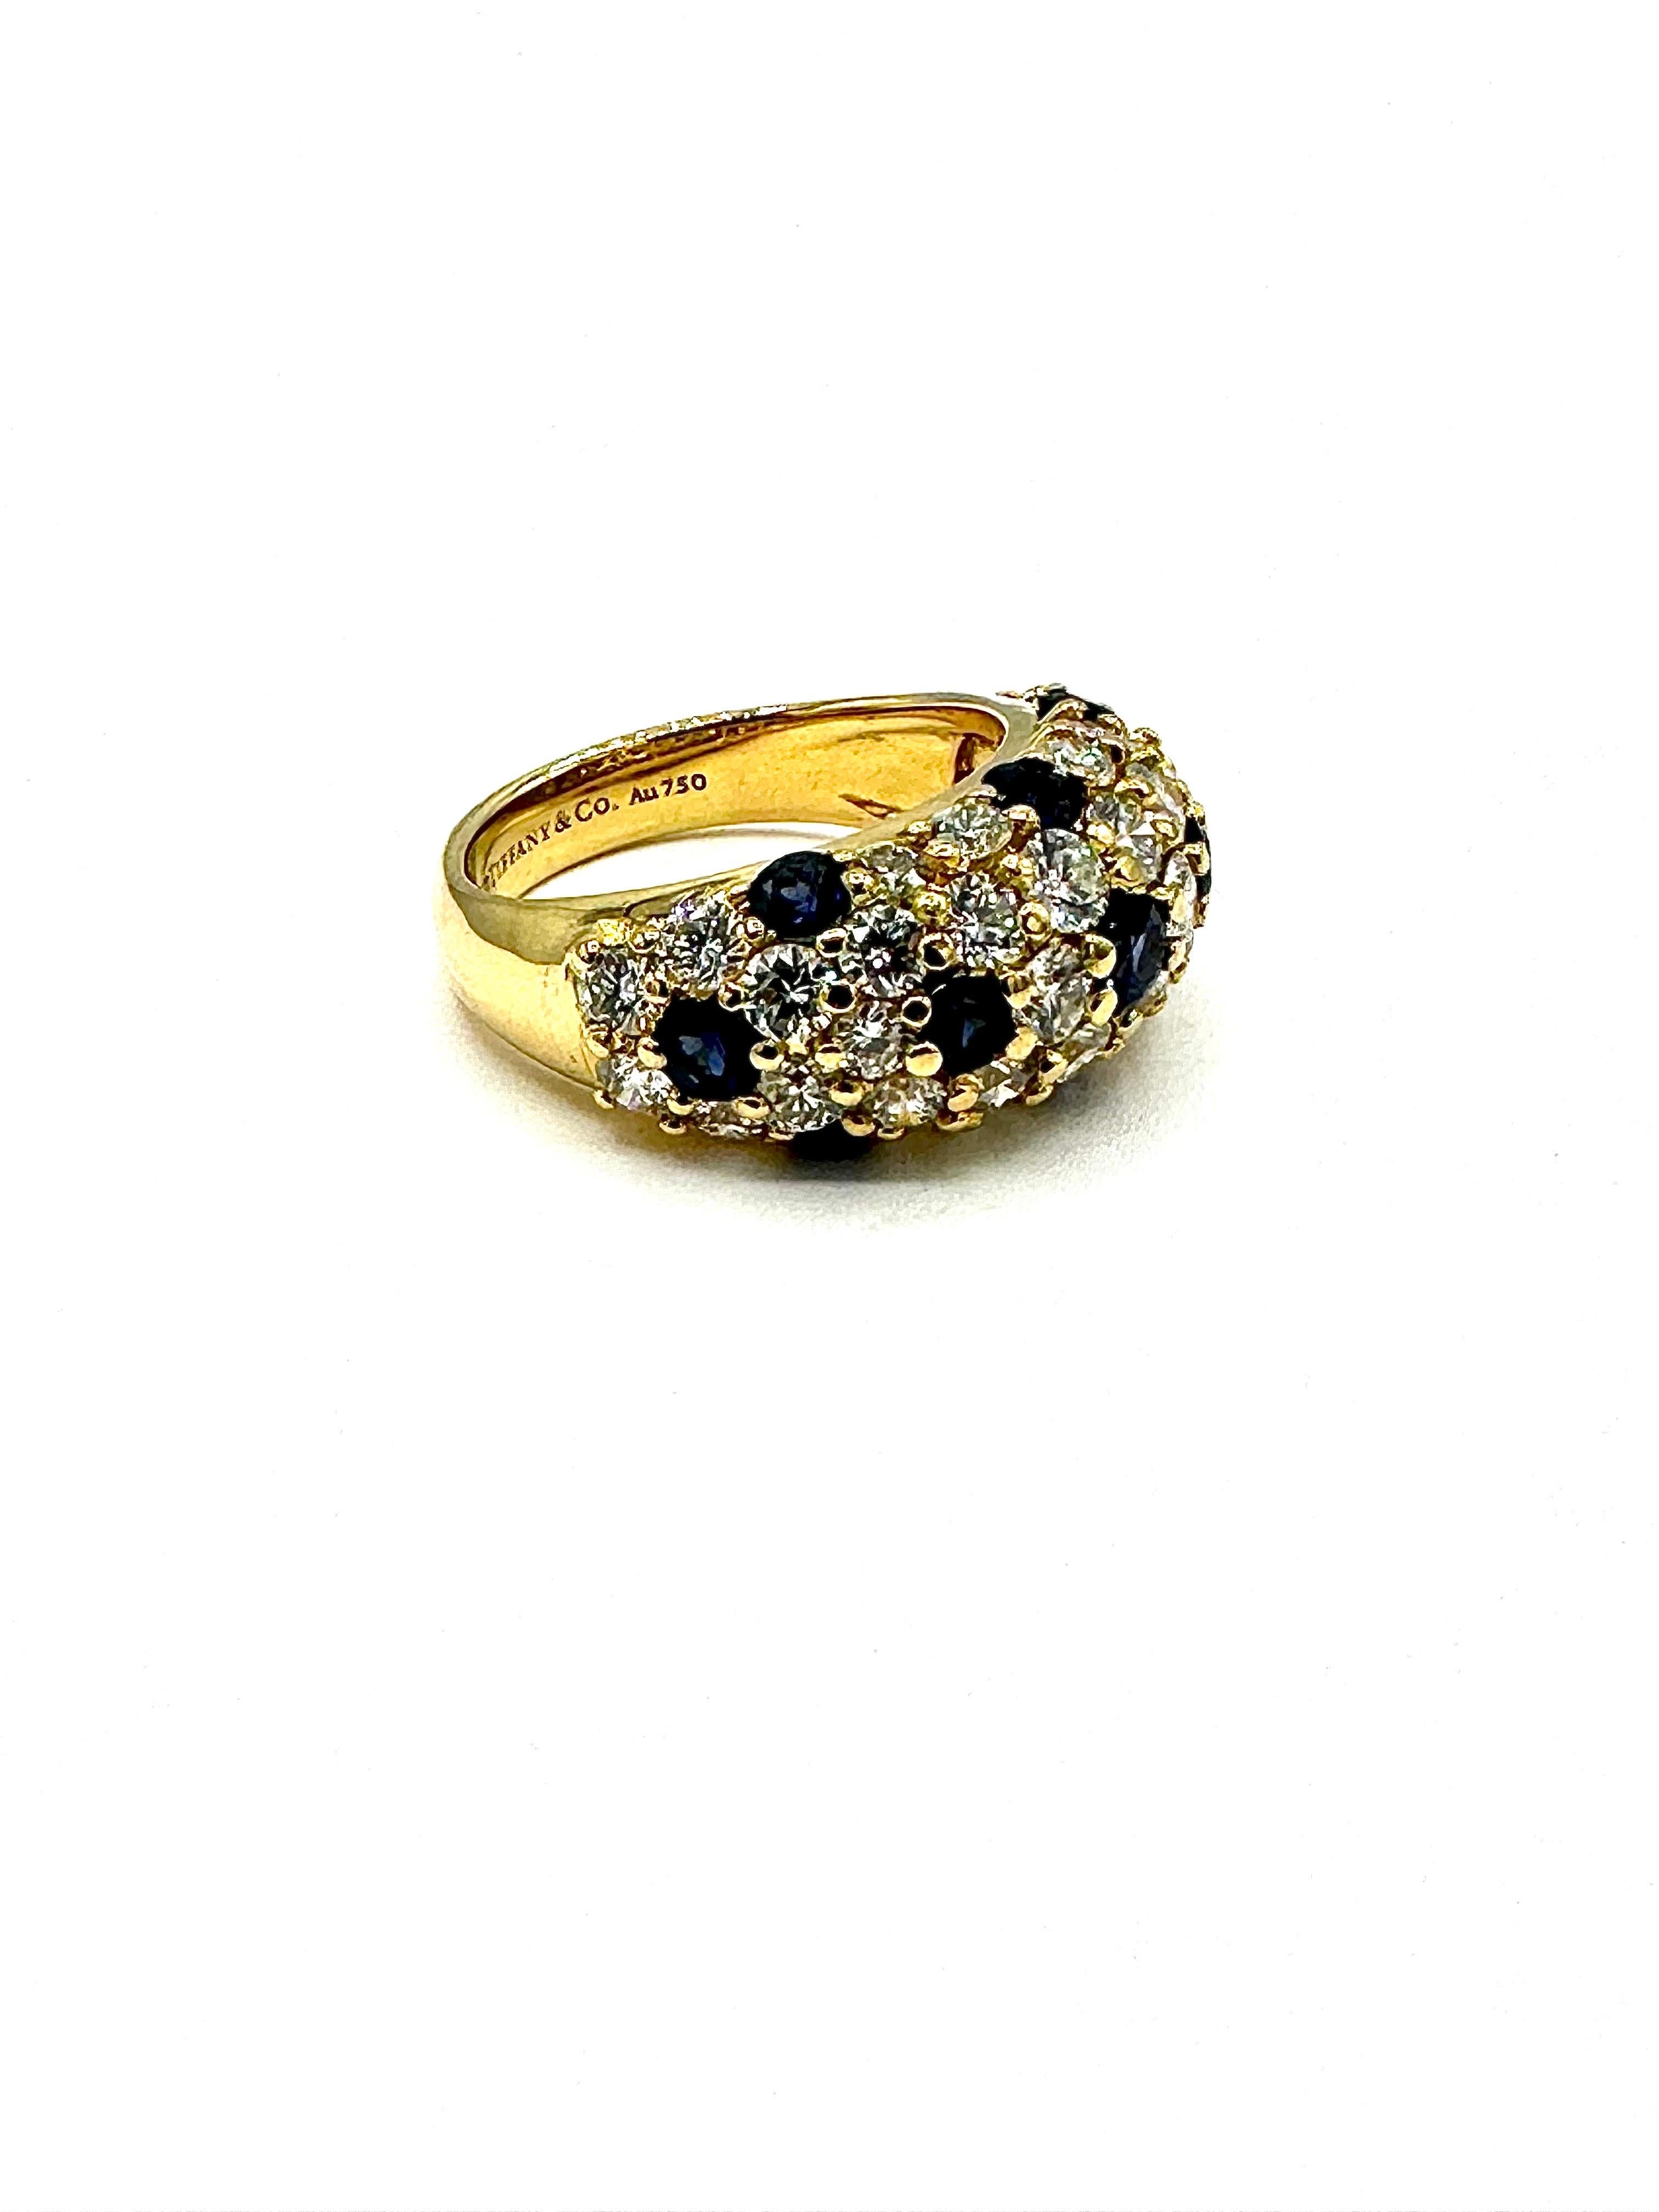 Modern Tiffany & Co. Bombe Diamond and Sapphire 18K Yellow Gold Domed Band Ring